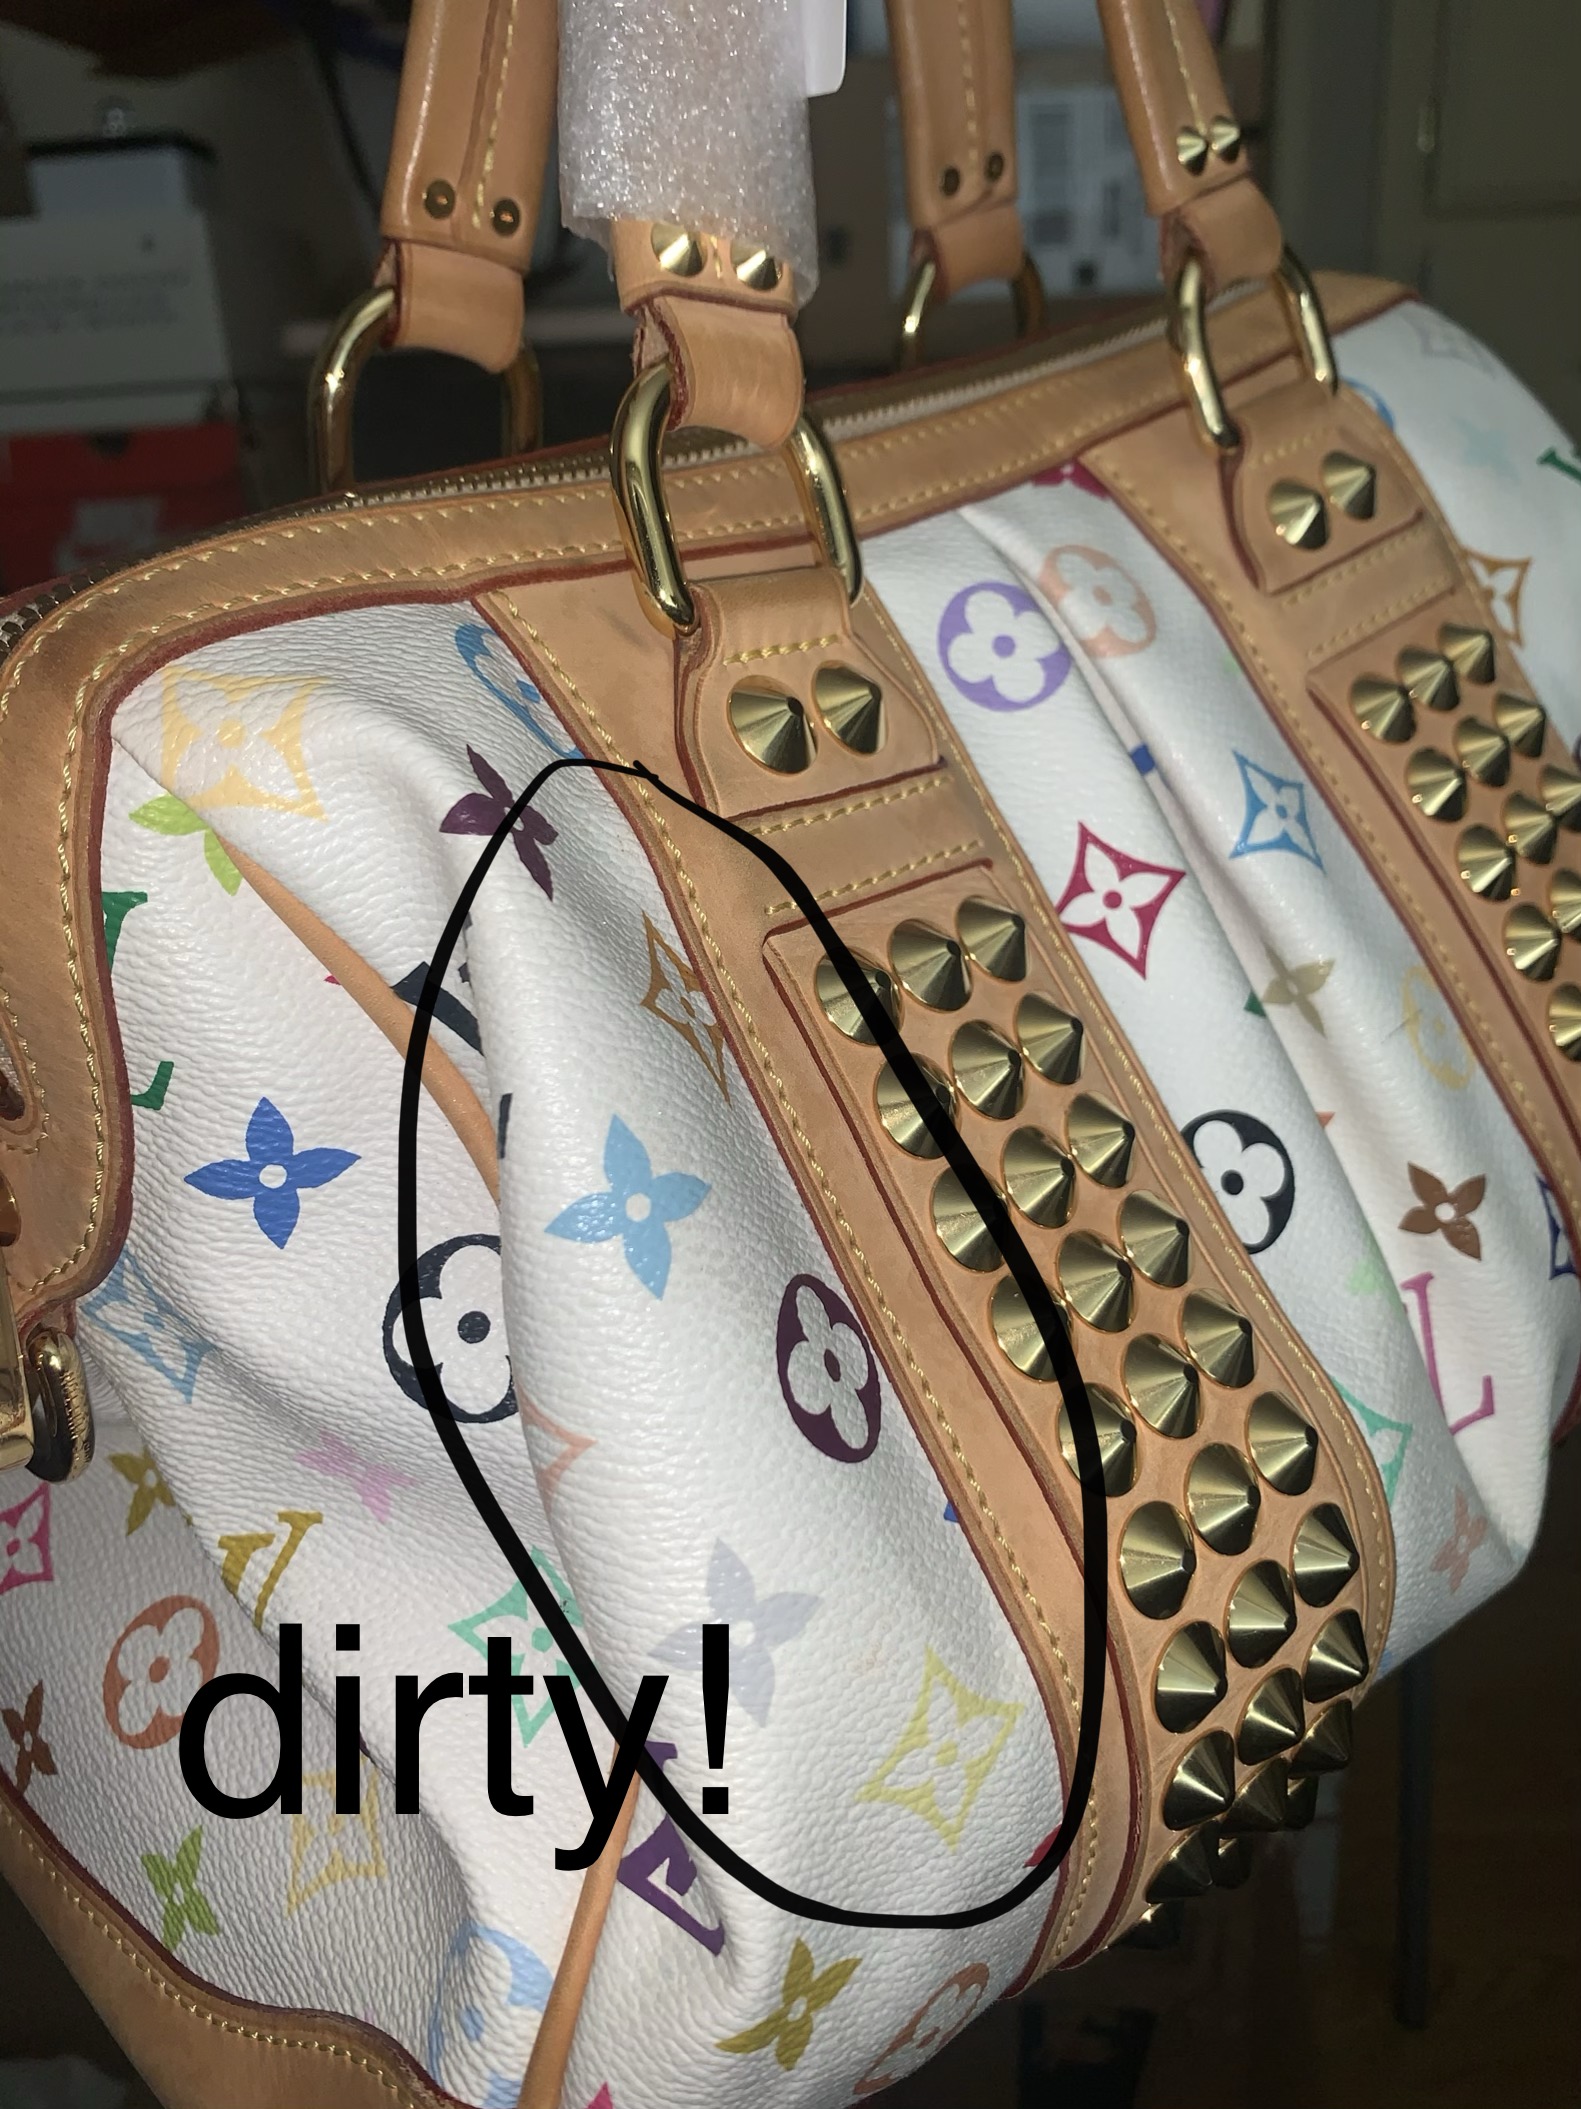 DIOR SADDLE BAG REVIEW, THE REAL REAL 2020 EXPERIENCE